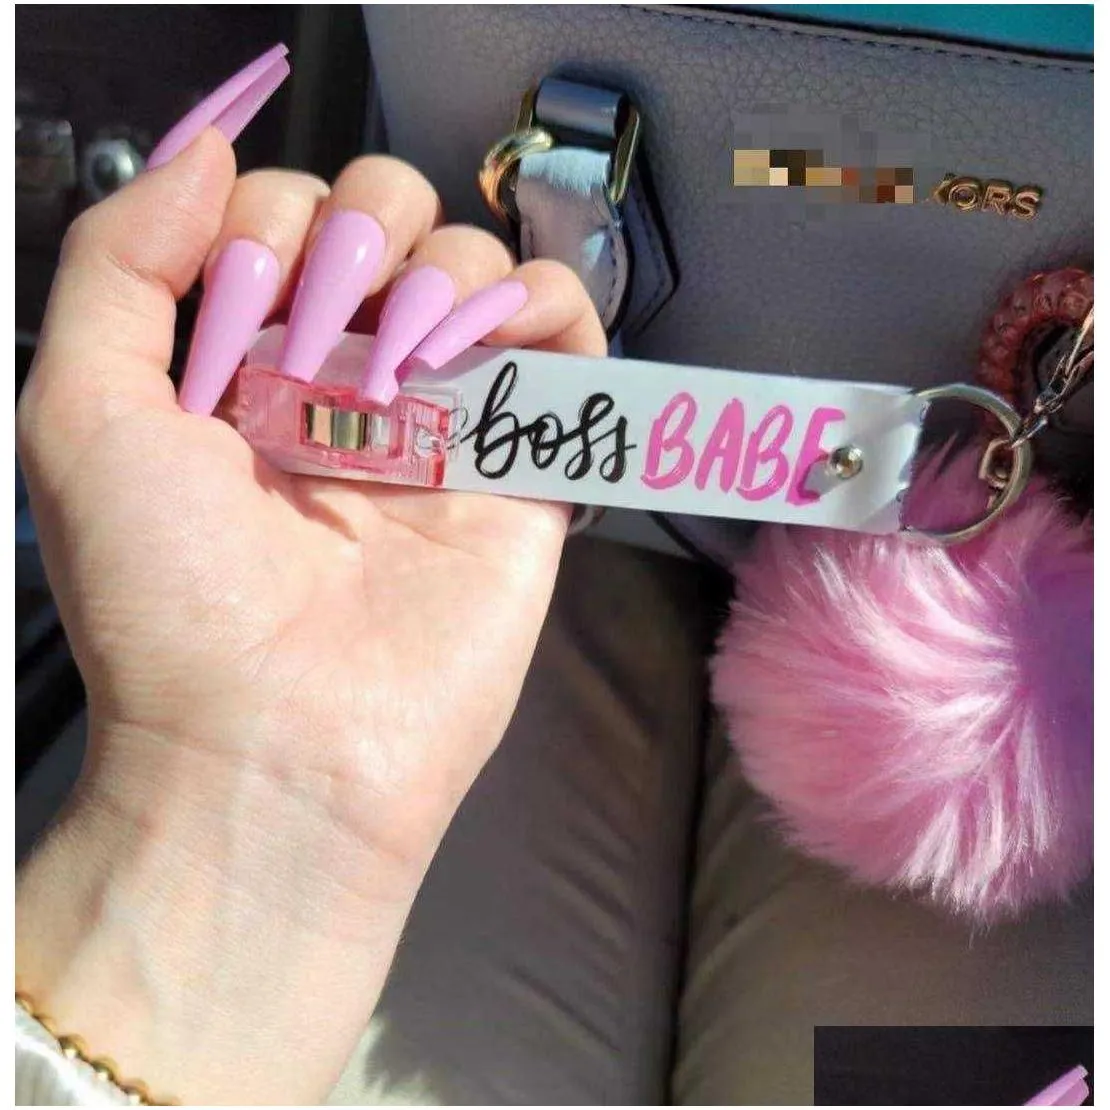 cute credit card puller pompom key rings acrylic debit bank card grabber for long nail atm rabbit fur ball keychain pink cards clip nails